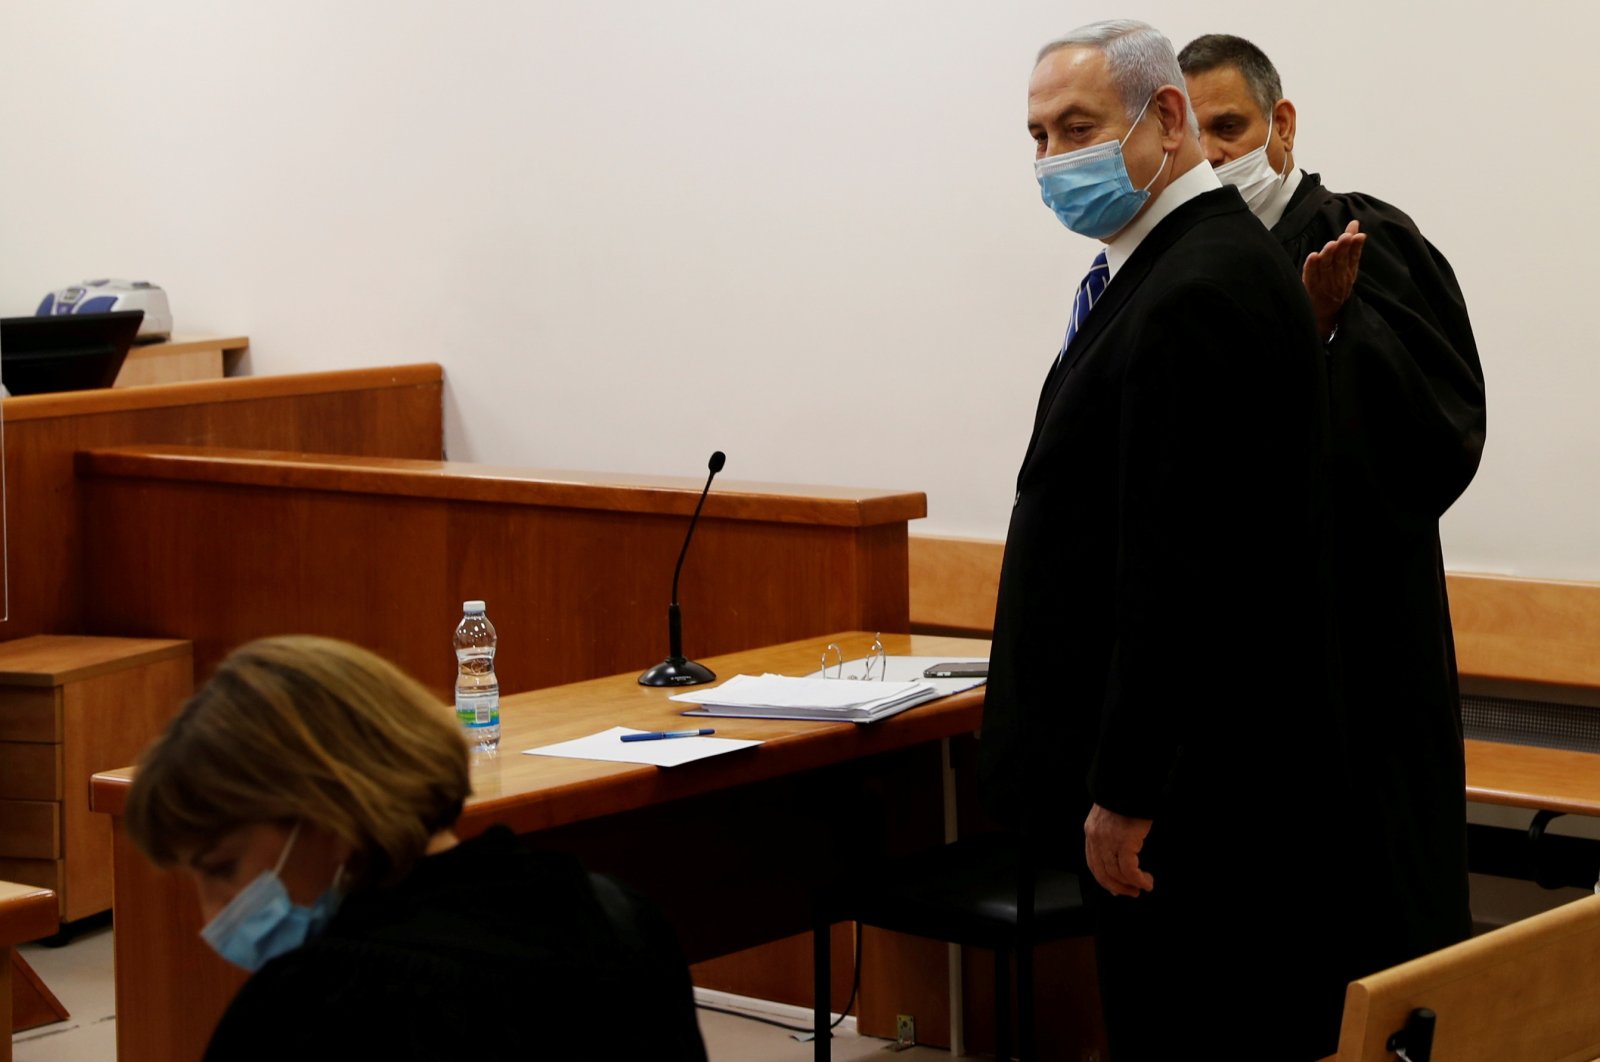 Israeli Prime Minister Benjamin Netanyahu, wearing a mask, stands inside the courtroom as his corruption trial opens at the Jerusalem District Court, Jerusalem, May 24, 2020. (Reuters Photo)